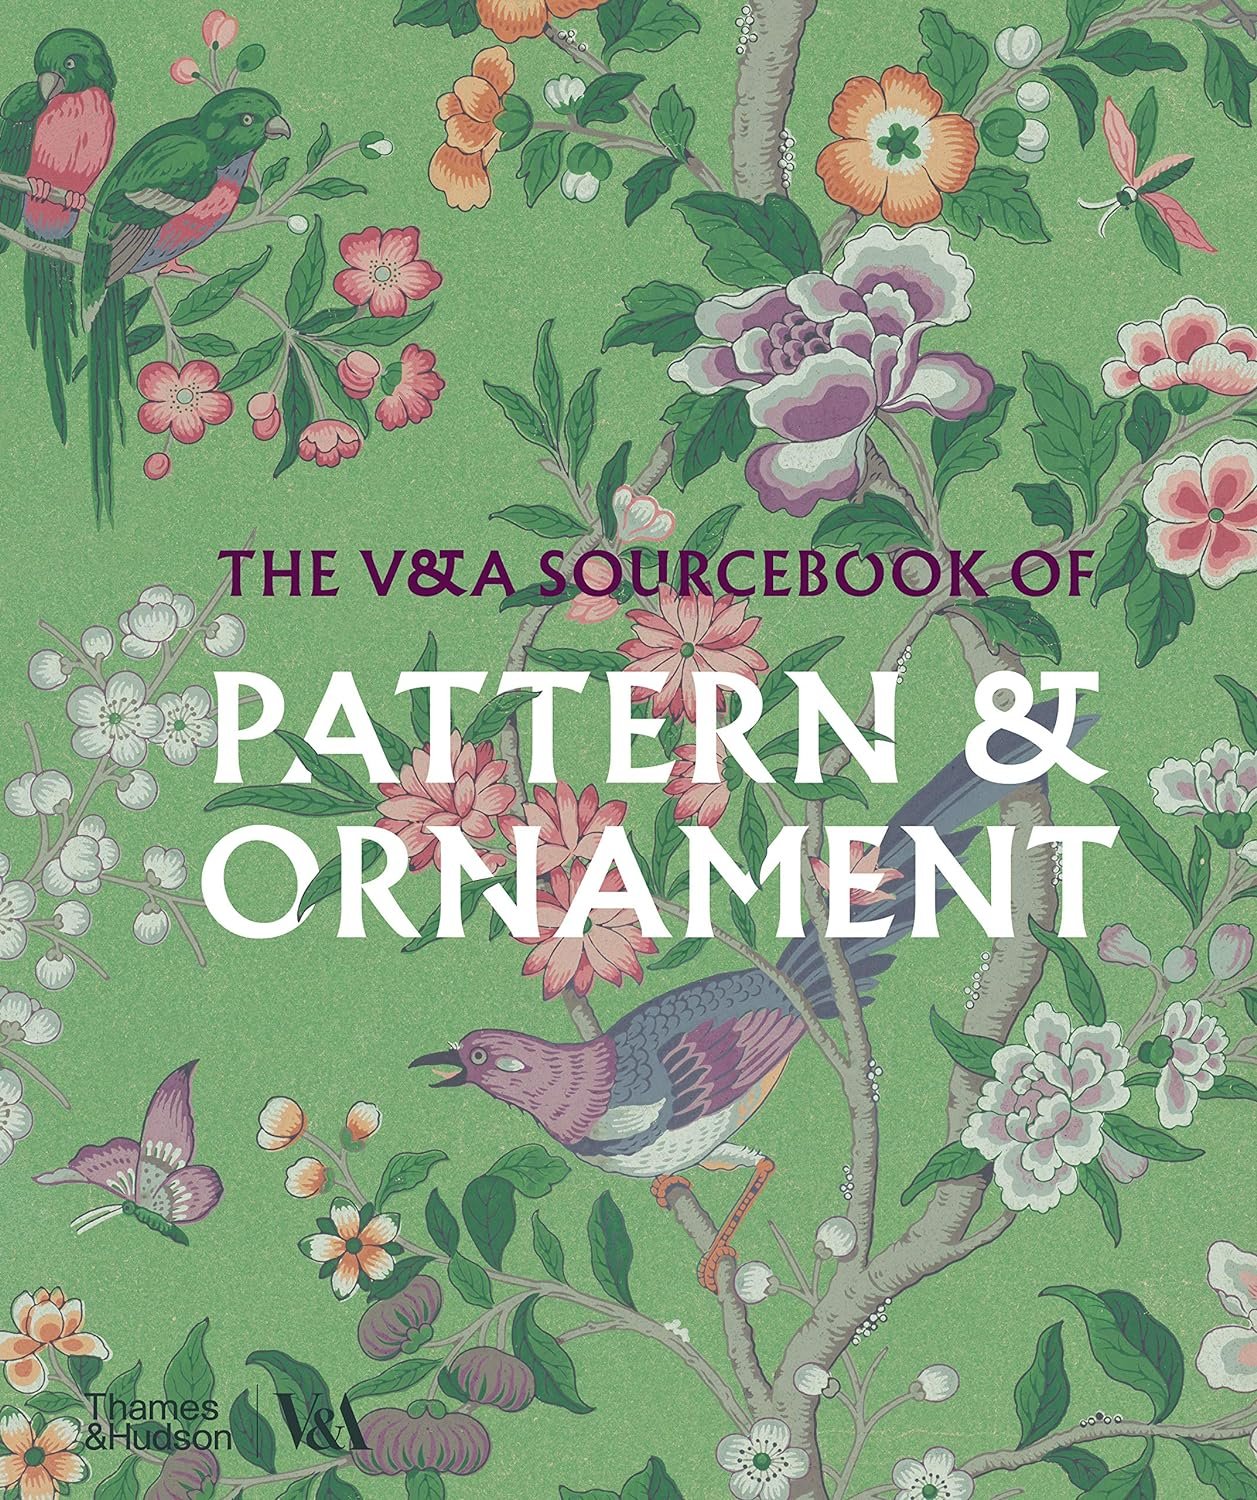 The V&A Sourcebook of Pattern and Ornament (V&A Museum)